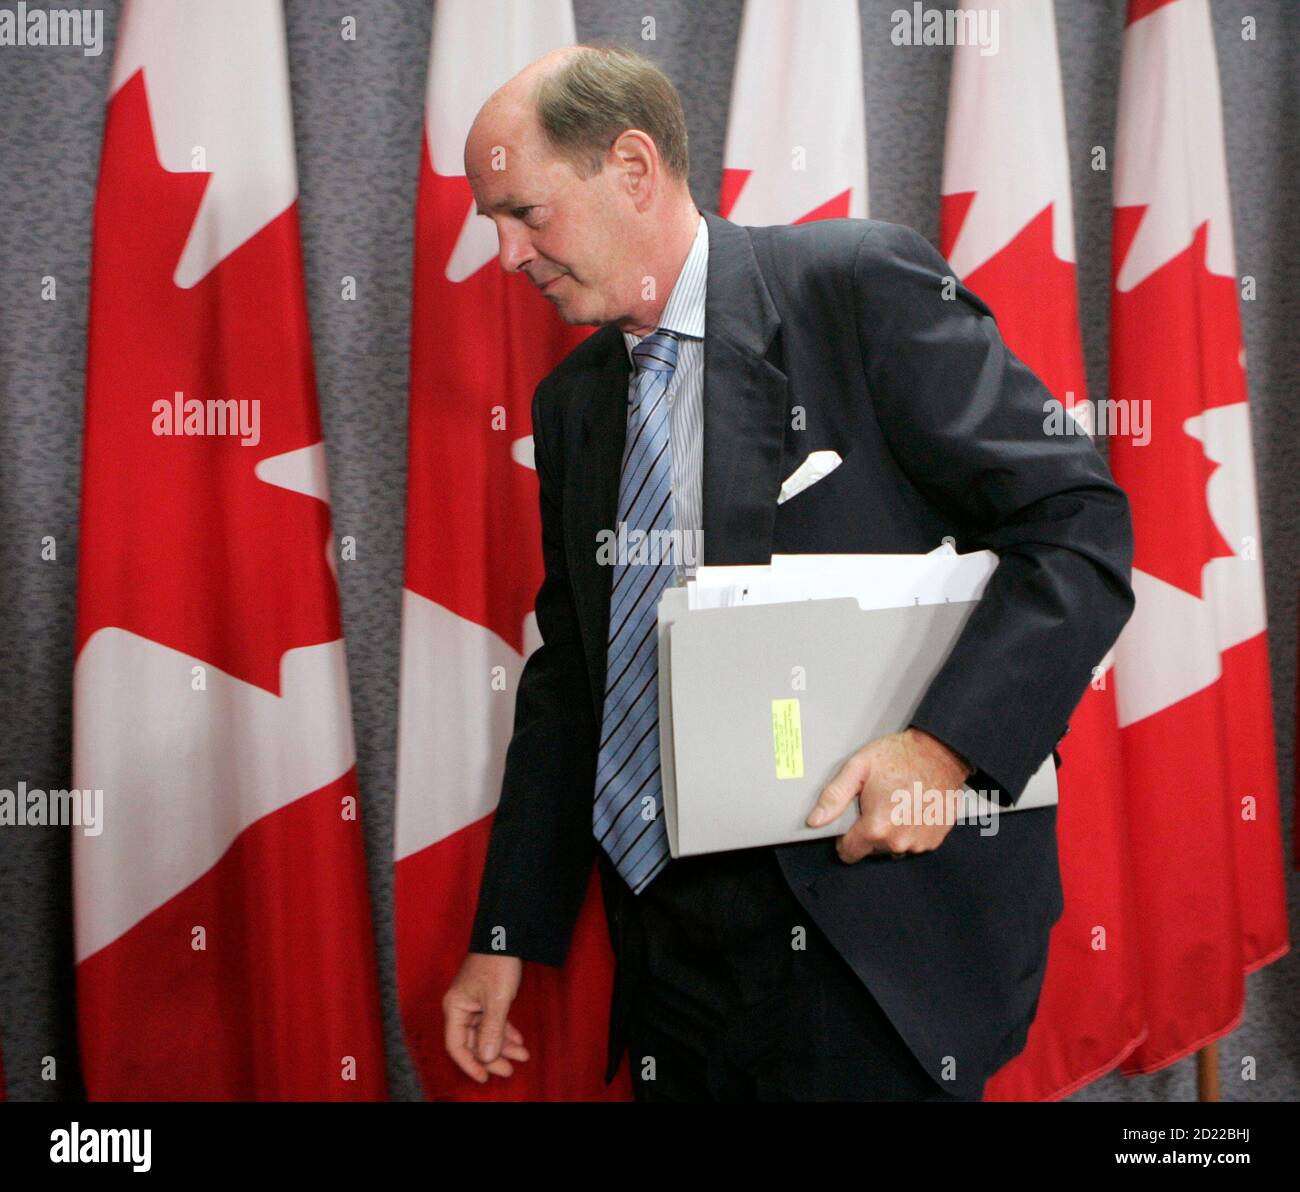 Bank of Canada Governor David Dodge leaves a news conference upon the release of the Monetary Policy Report in Ottawa July 12, 2007.        REUTERS/Chris Wattie   (CANADA) Stock Photo